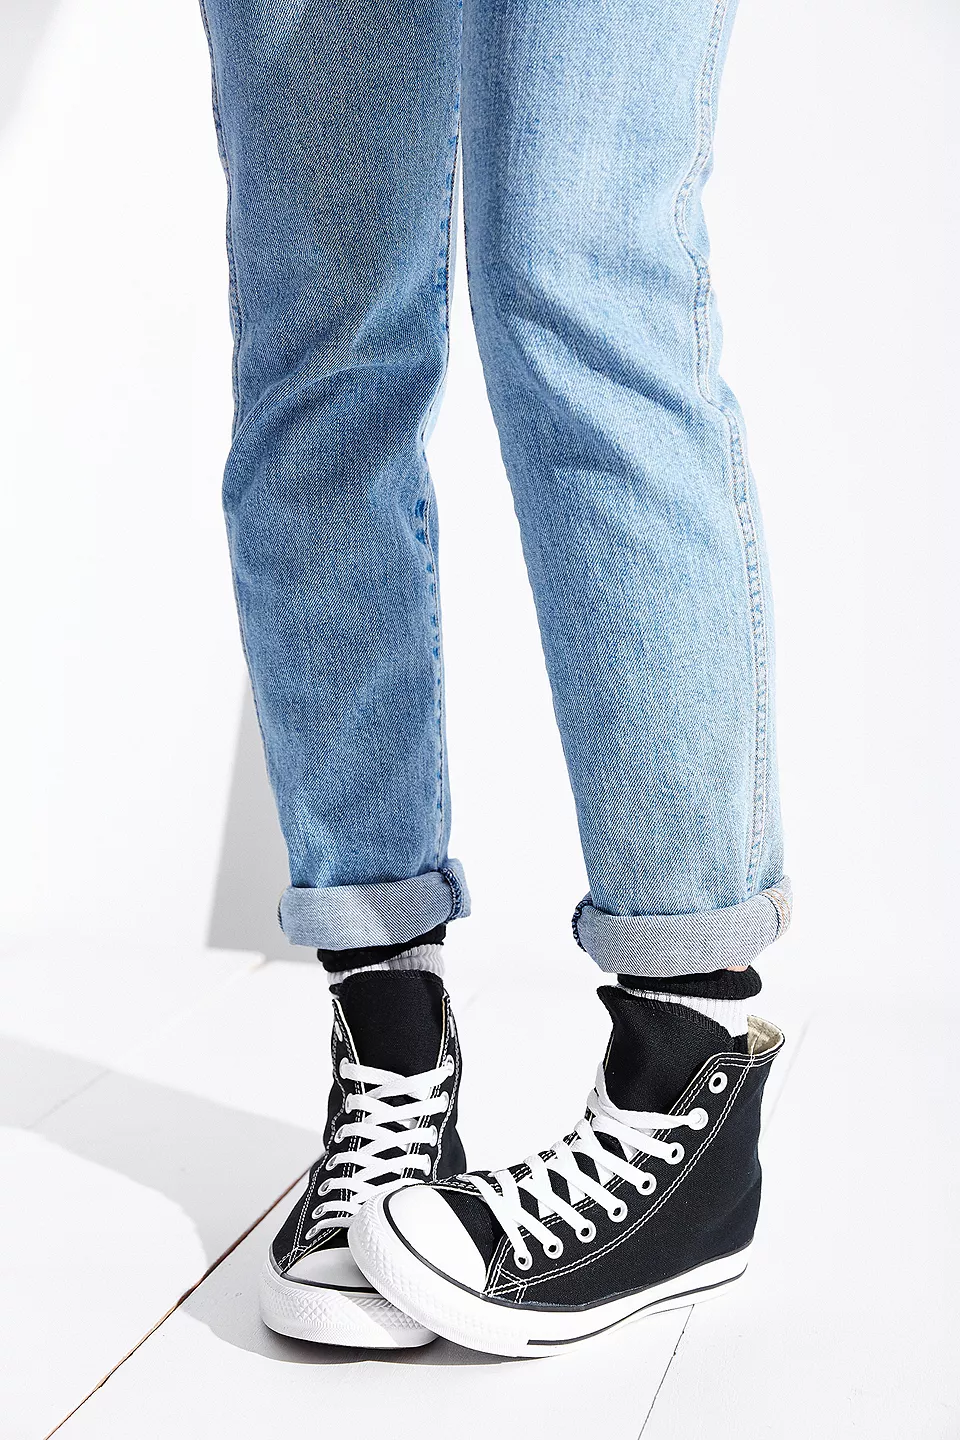 urbanoutfitters.com | Converse Chuck Taylor All Star Black Canvas High Top Trainers